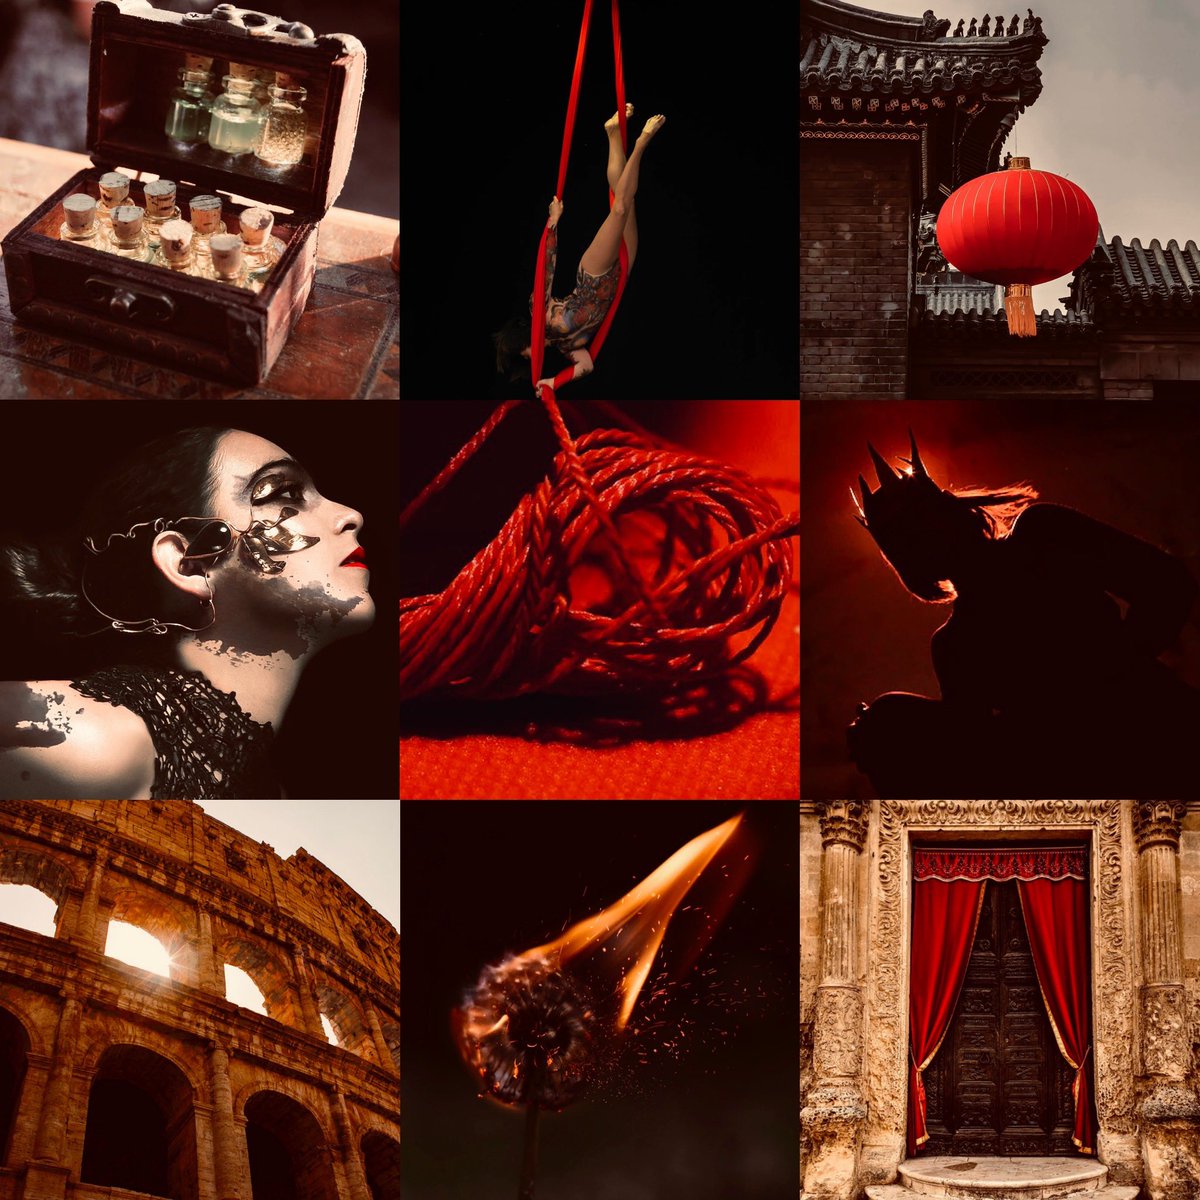 With nothing to lose: Come one, come all!🔥🎪🧶 An Imperial China X Ancient Rome YA Fantasy ft. - A multiracial, morally grey con artist - A competition of circuses - A collector of goddess-gifted humans - A hooded, brooding stranger - And Fate being an absolute B****